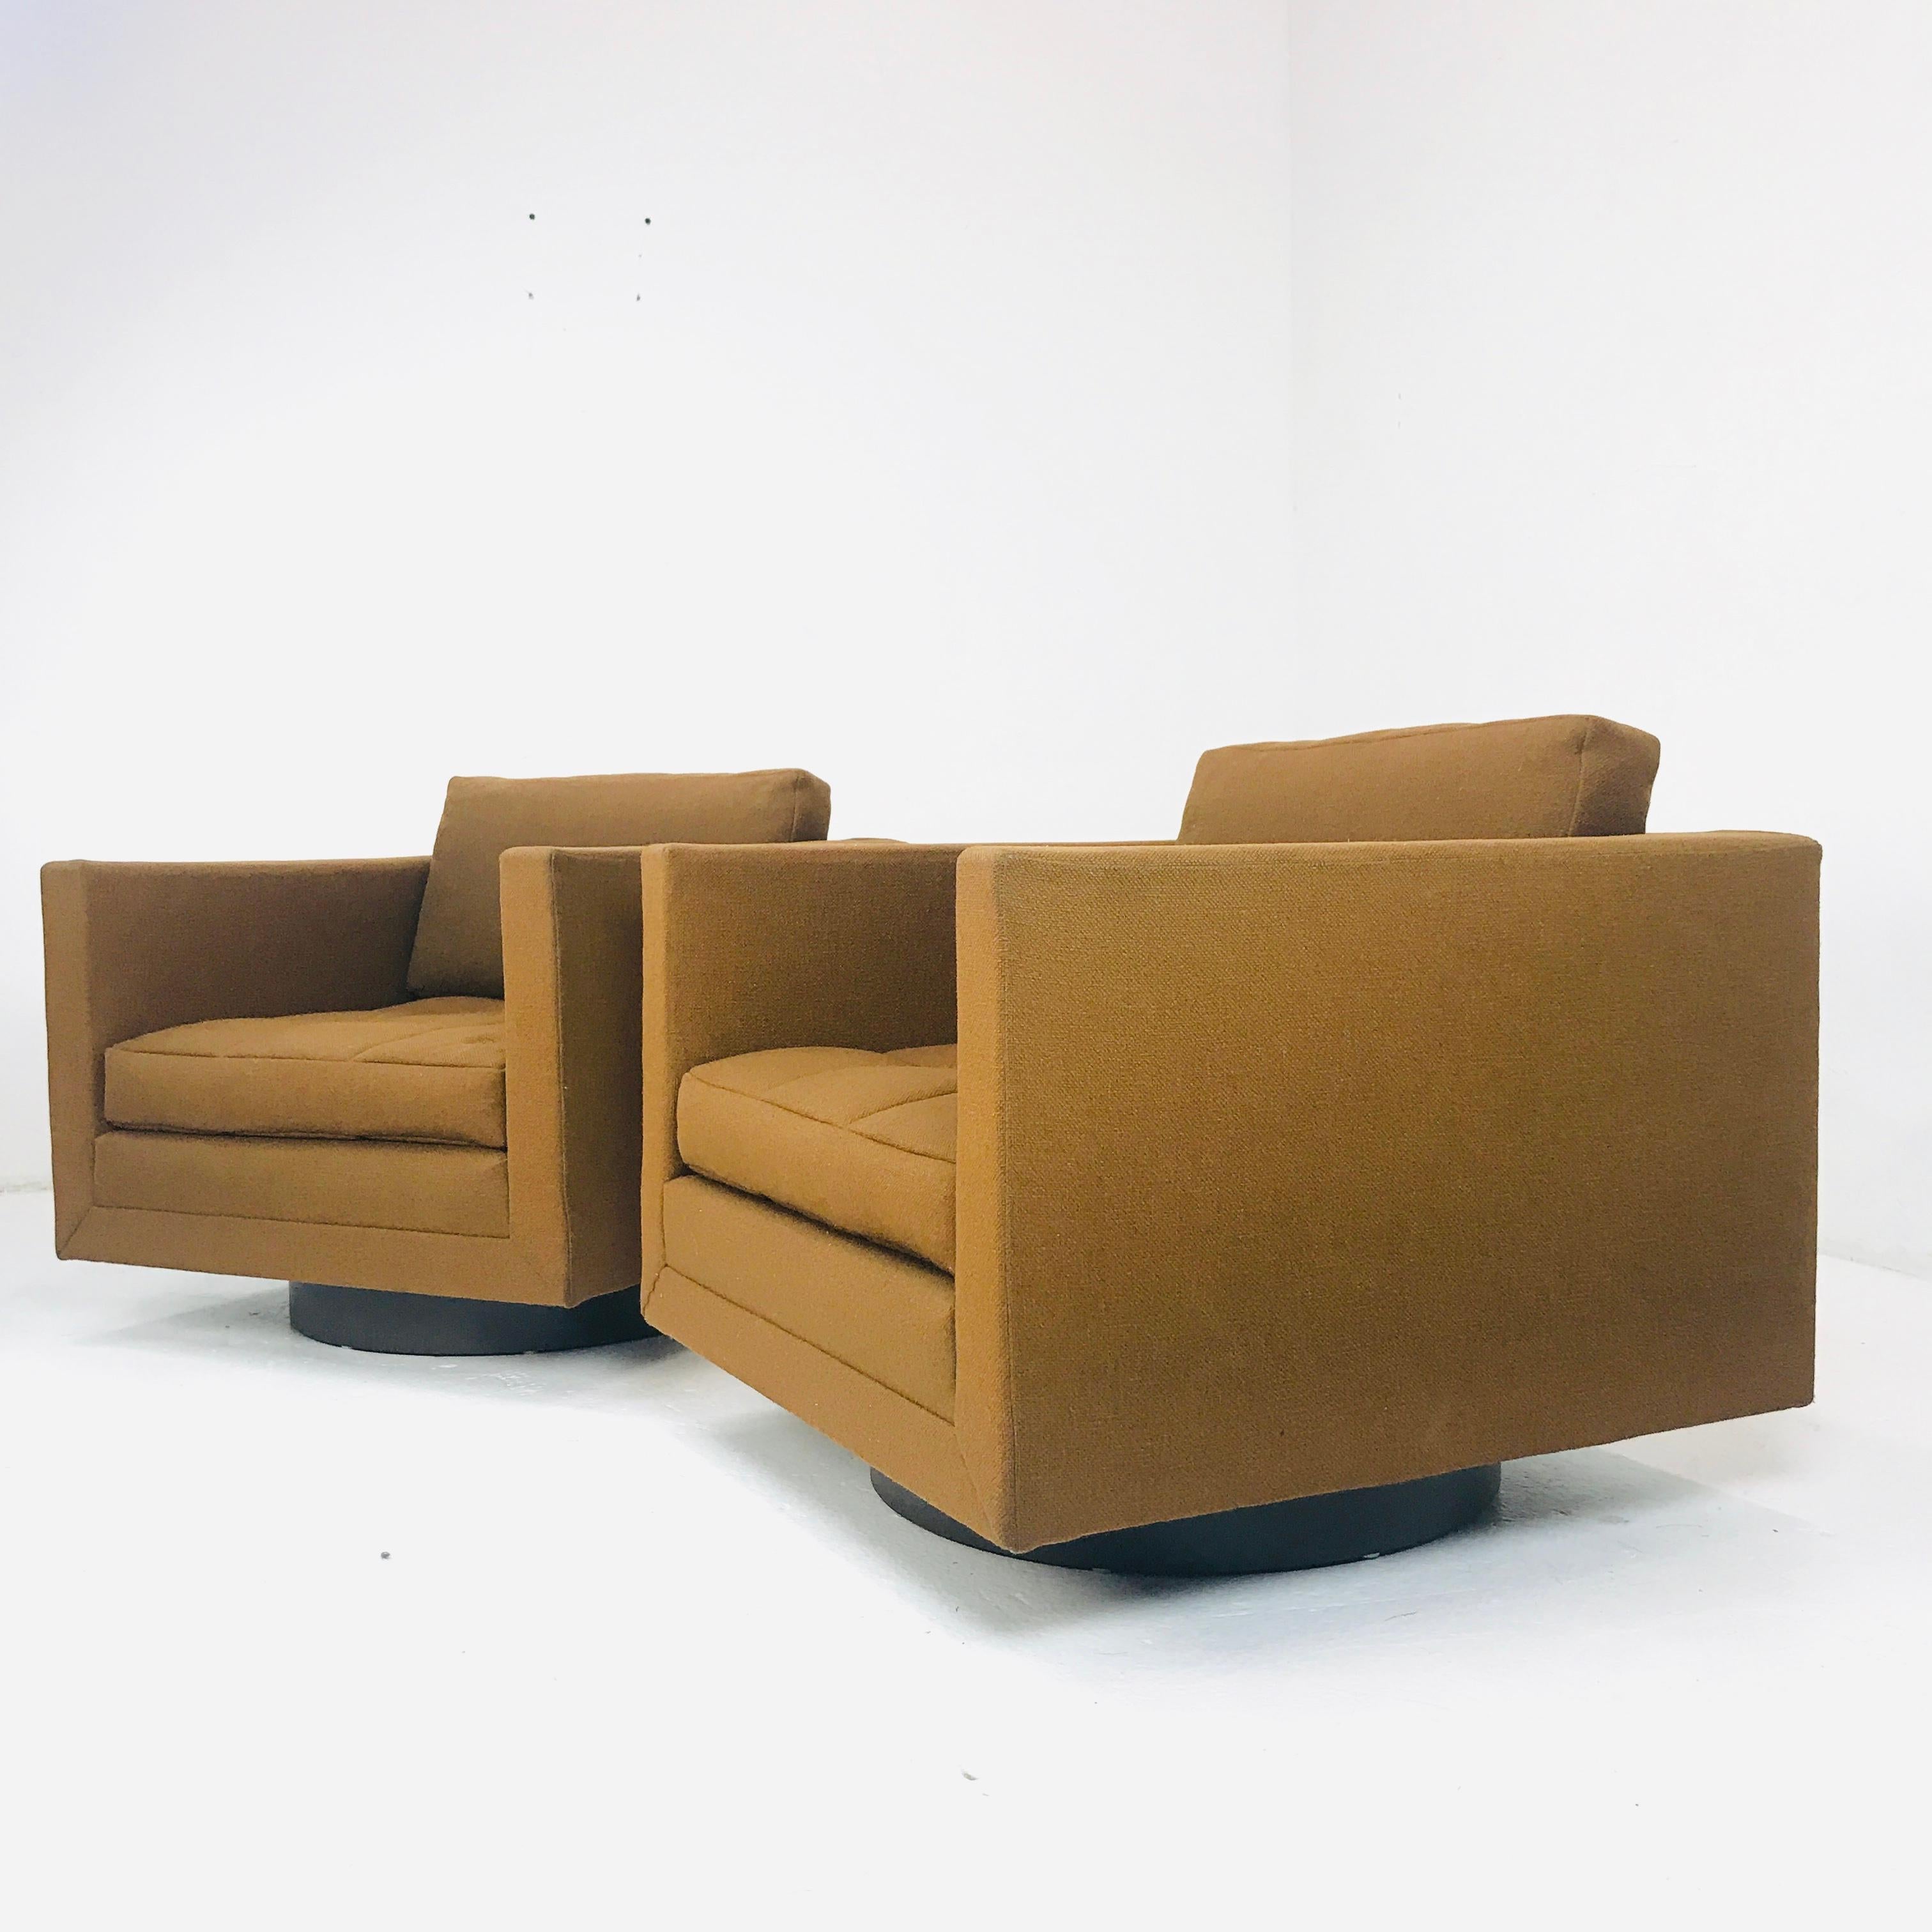 Pair of Harvey Probber Cube Swivel Chairs, Signed (amerikanisch)